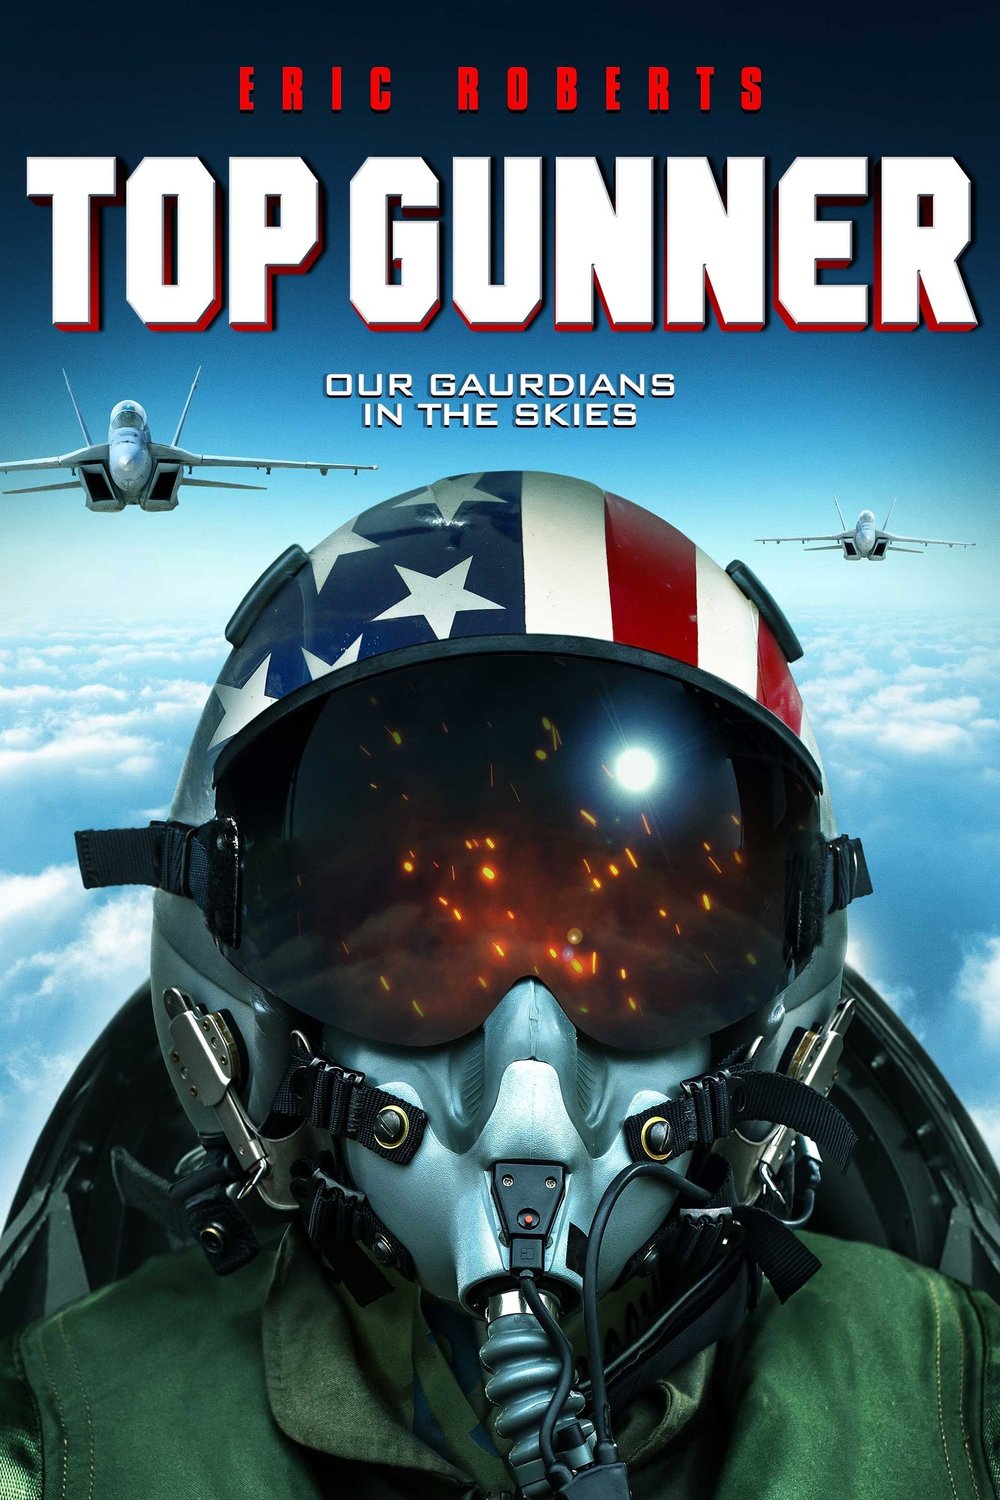 Poster of the movie Top Gunner